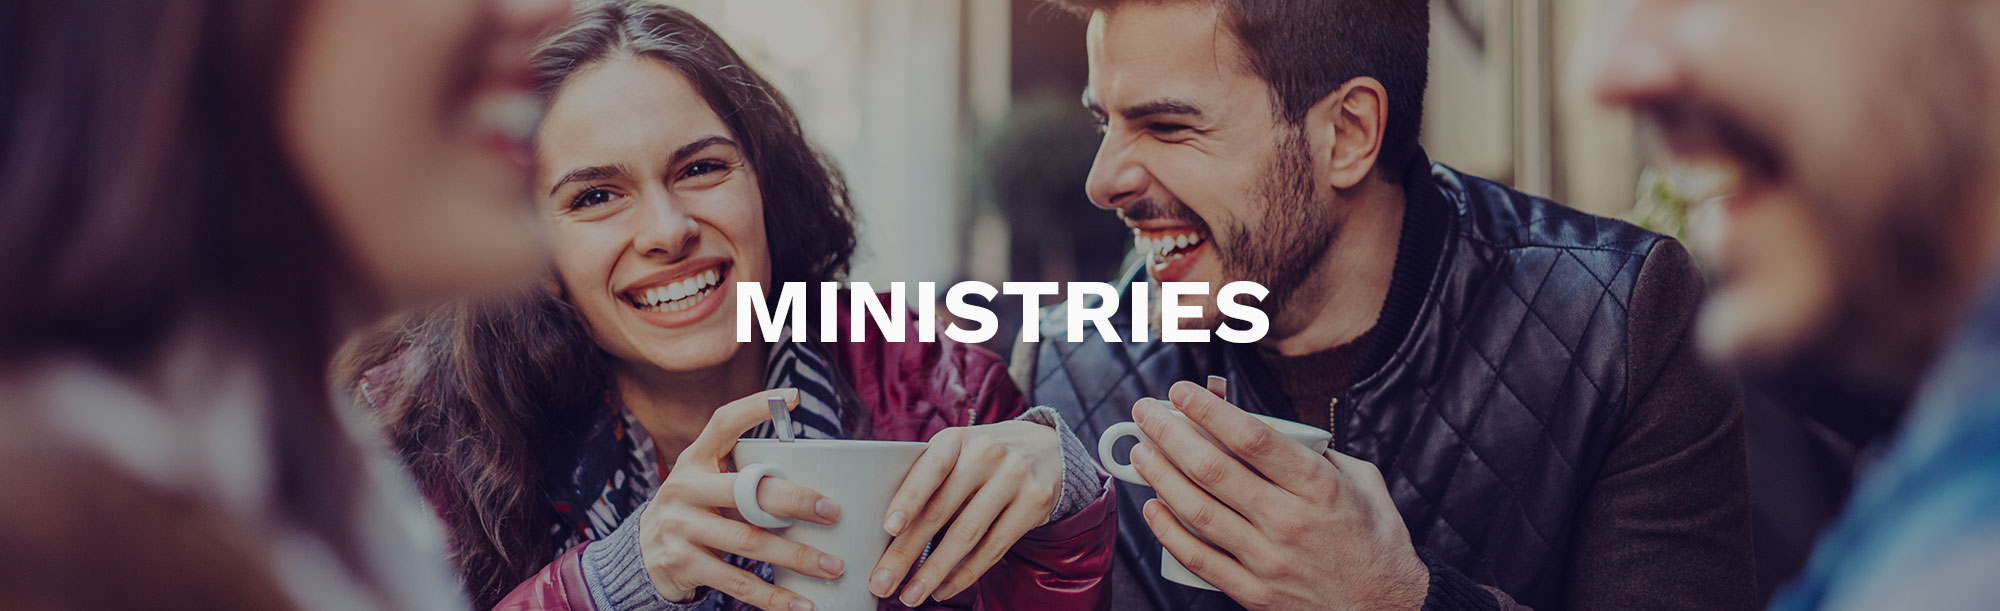 MINISTRIES PAGE